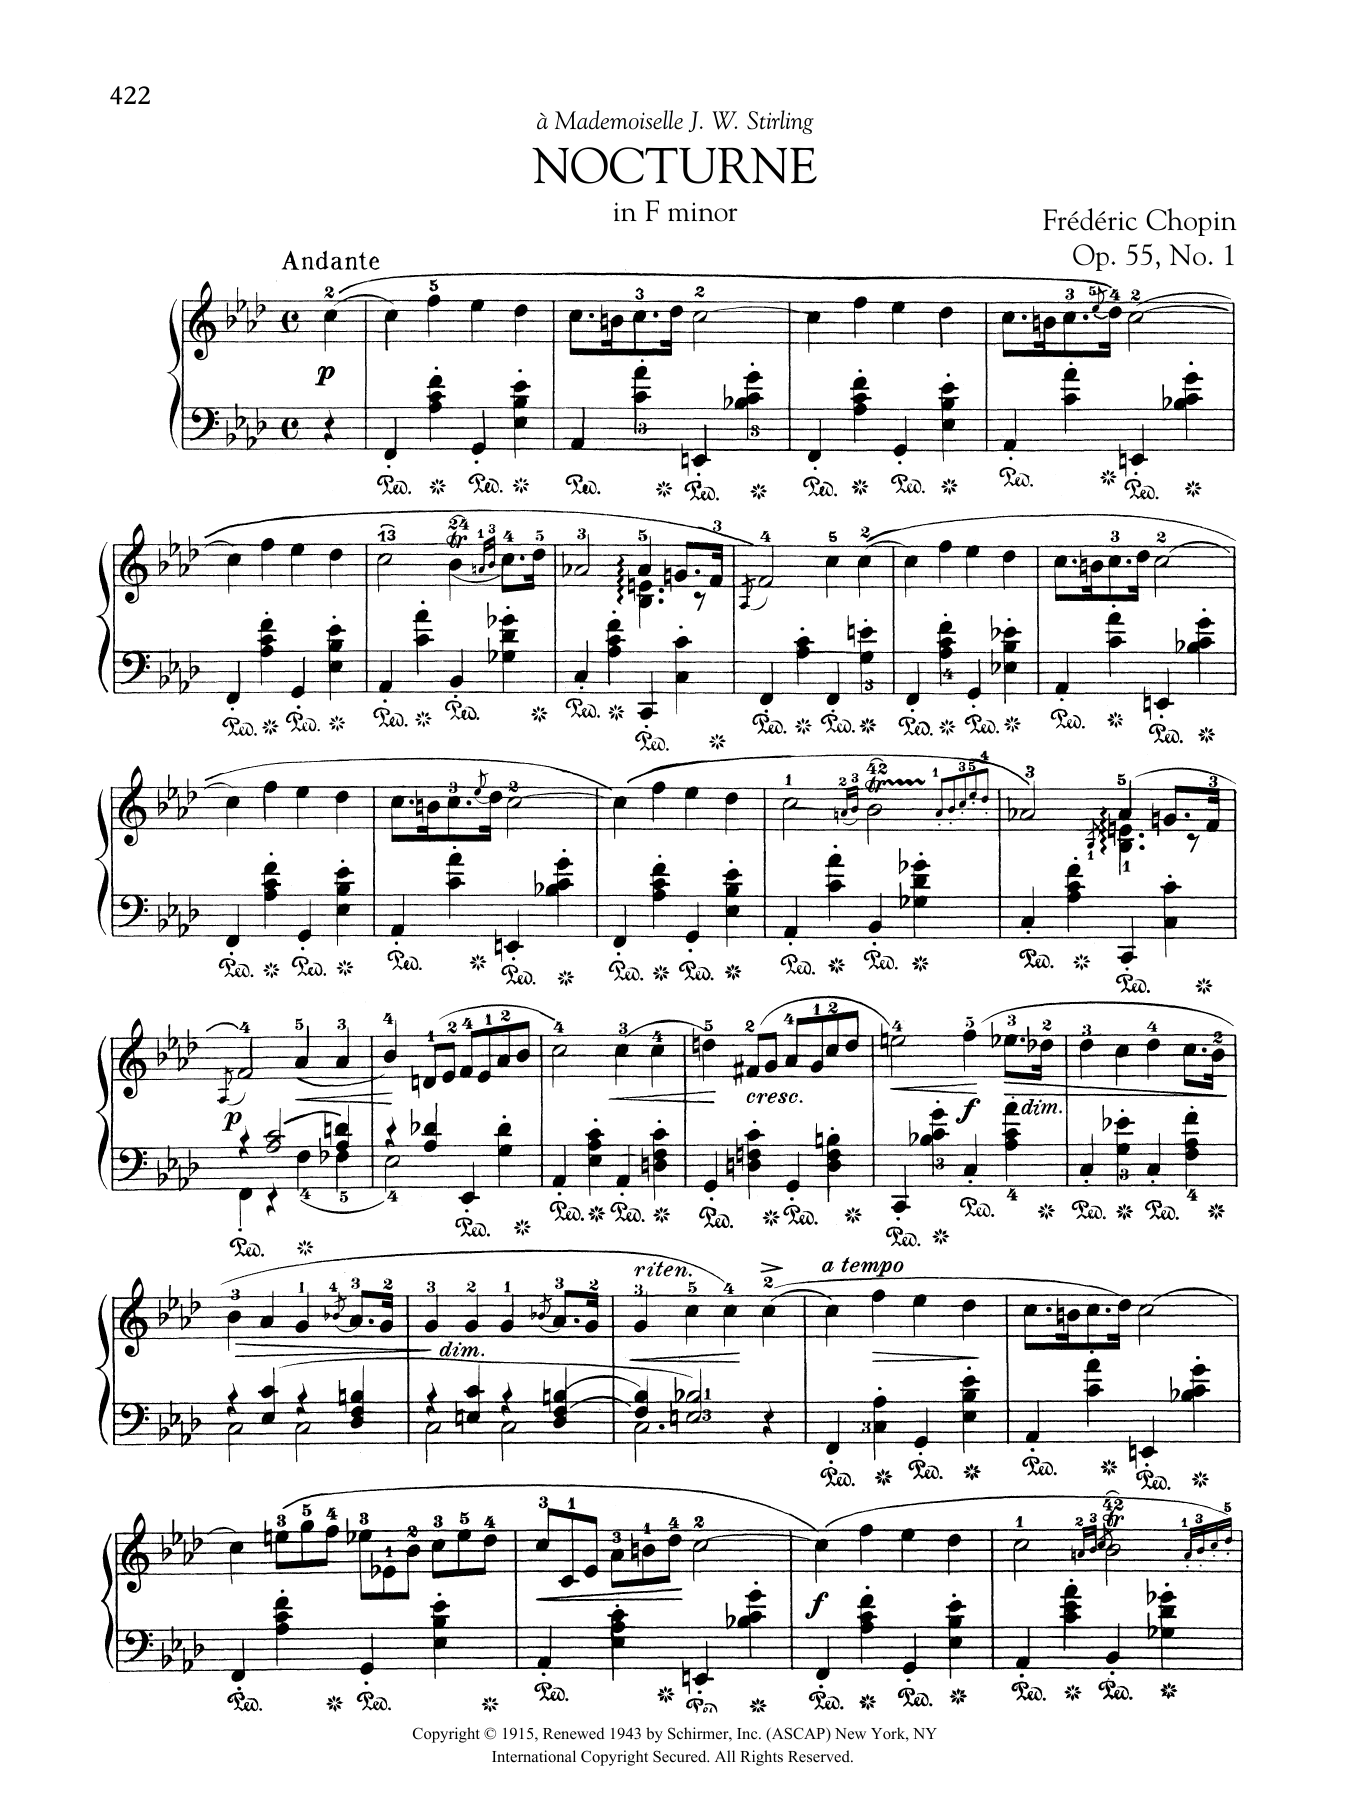 Frédéric Chopin Nocturne in F minor, Op. 55, No. 1 sheet music notes and chords. Download Printable PDF.